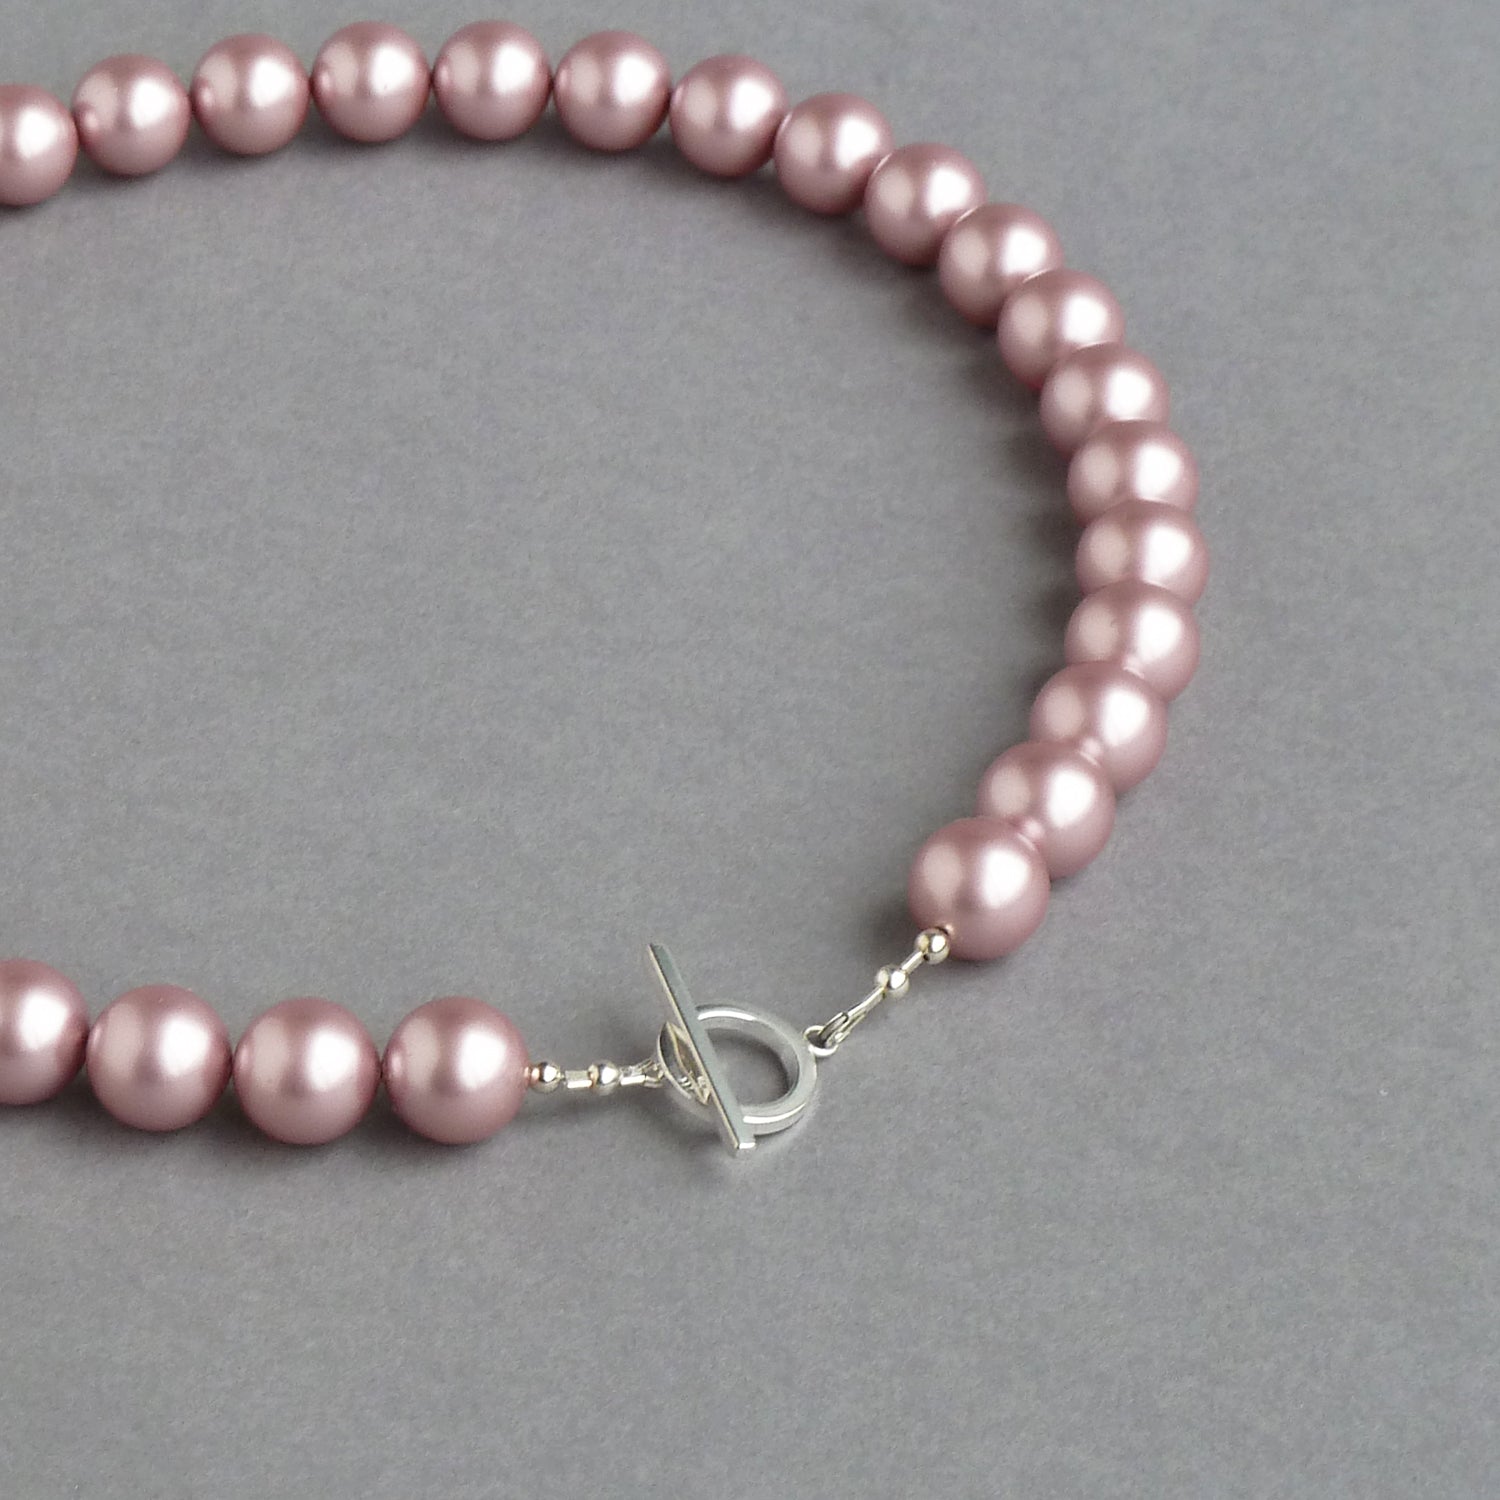 Chunky powder pink pearl necklace